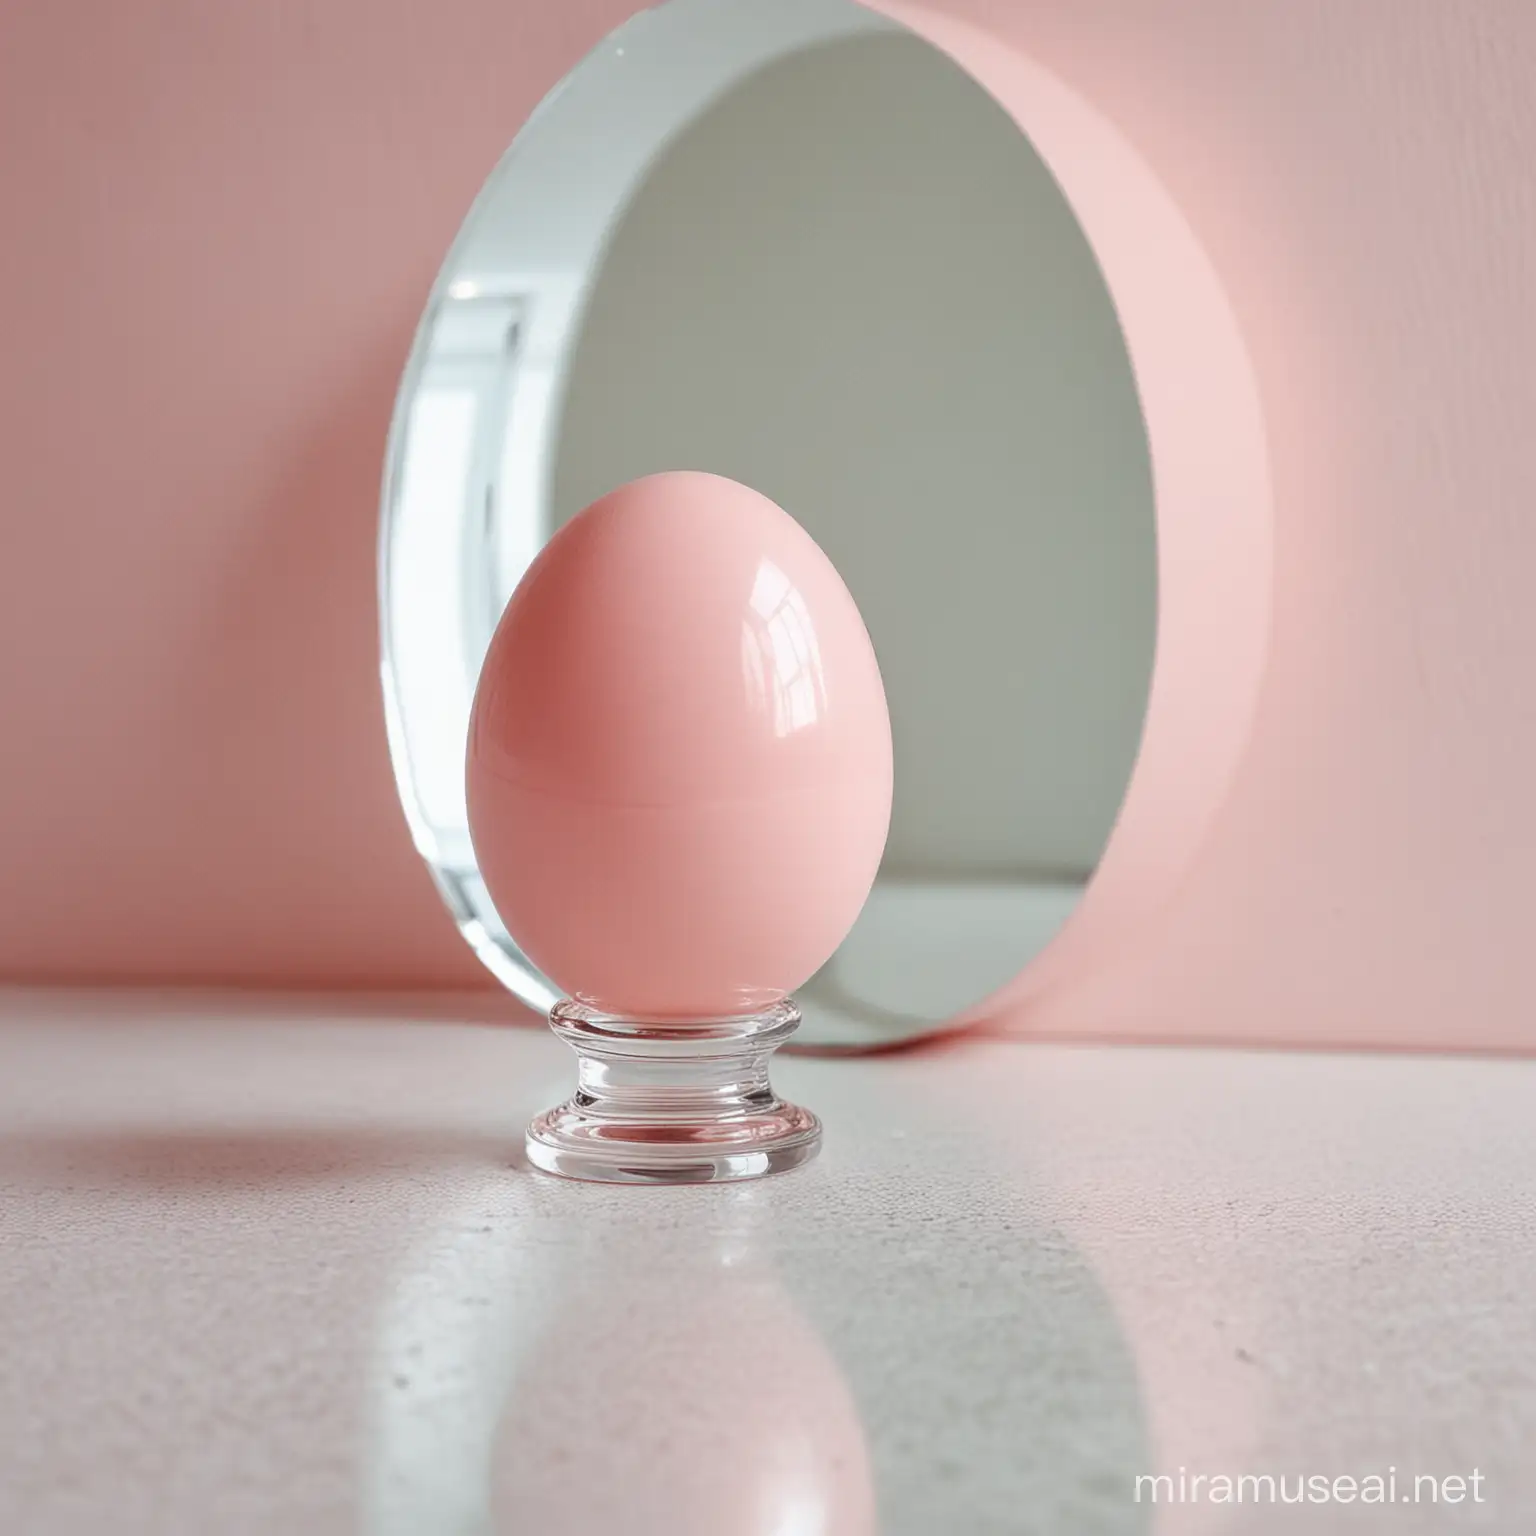 Shimmering Pink Orb in Reflective Mirror